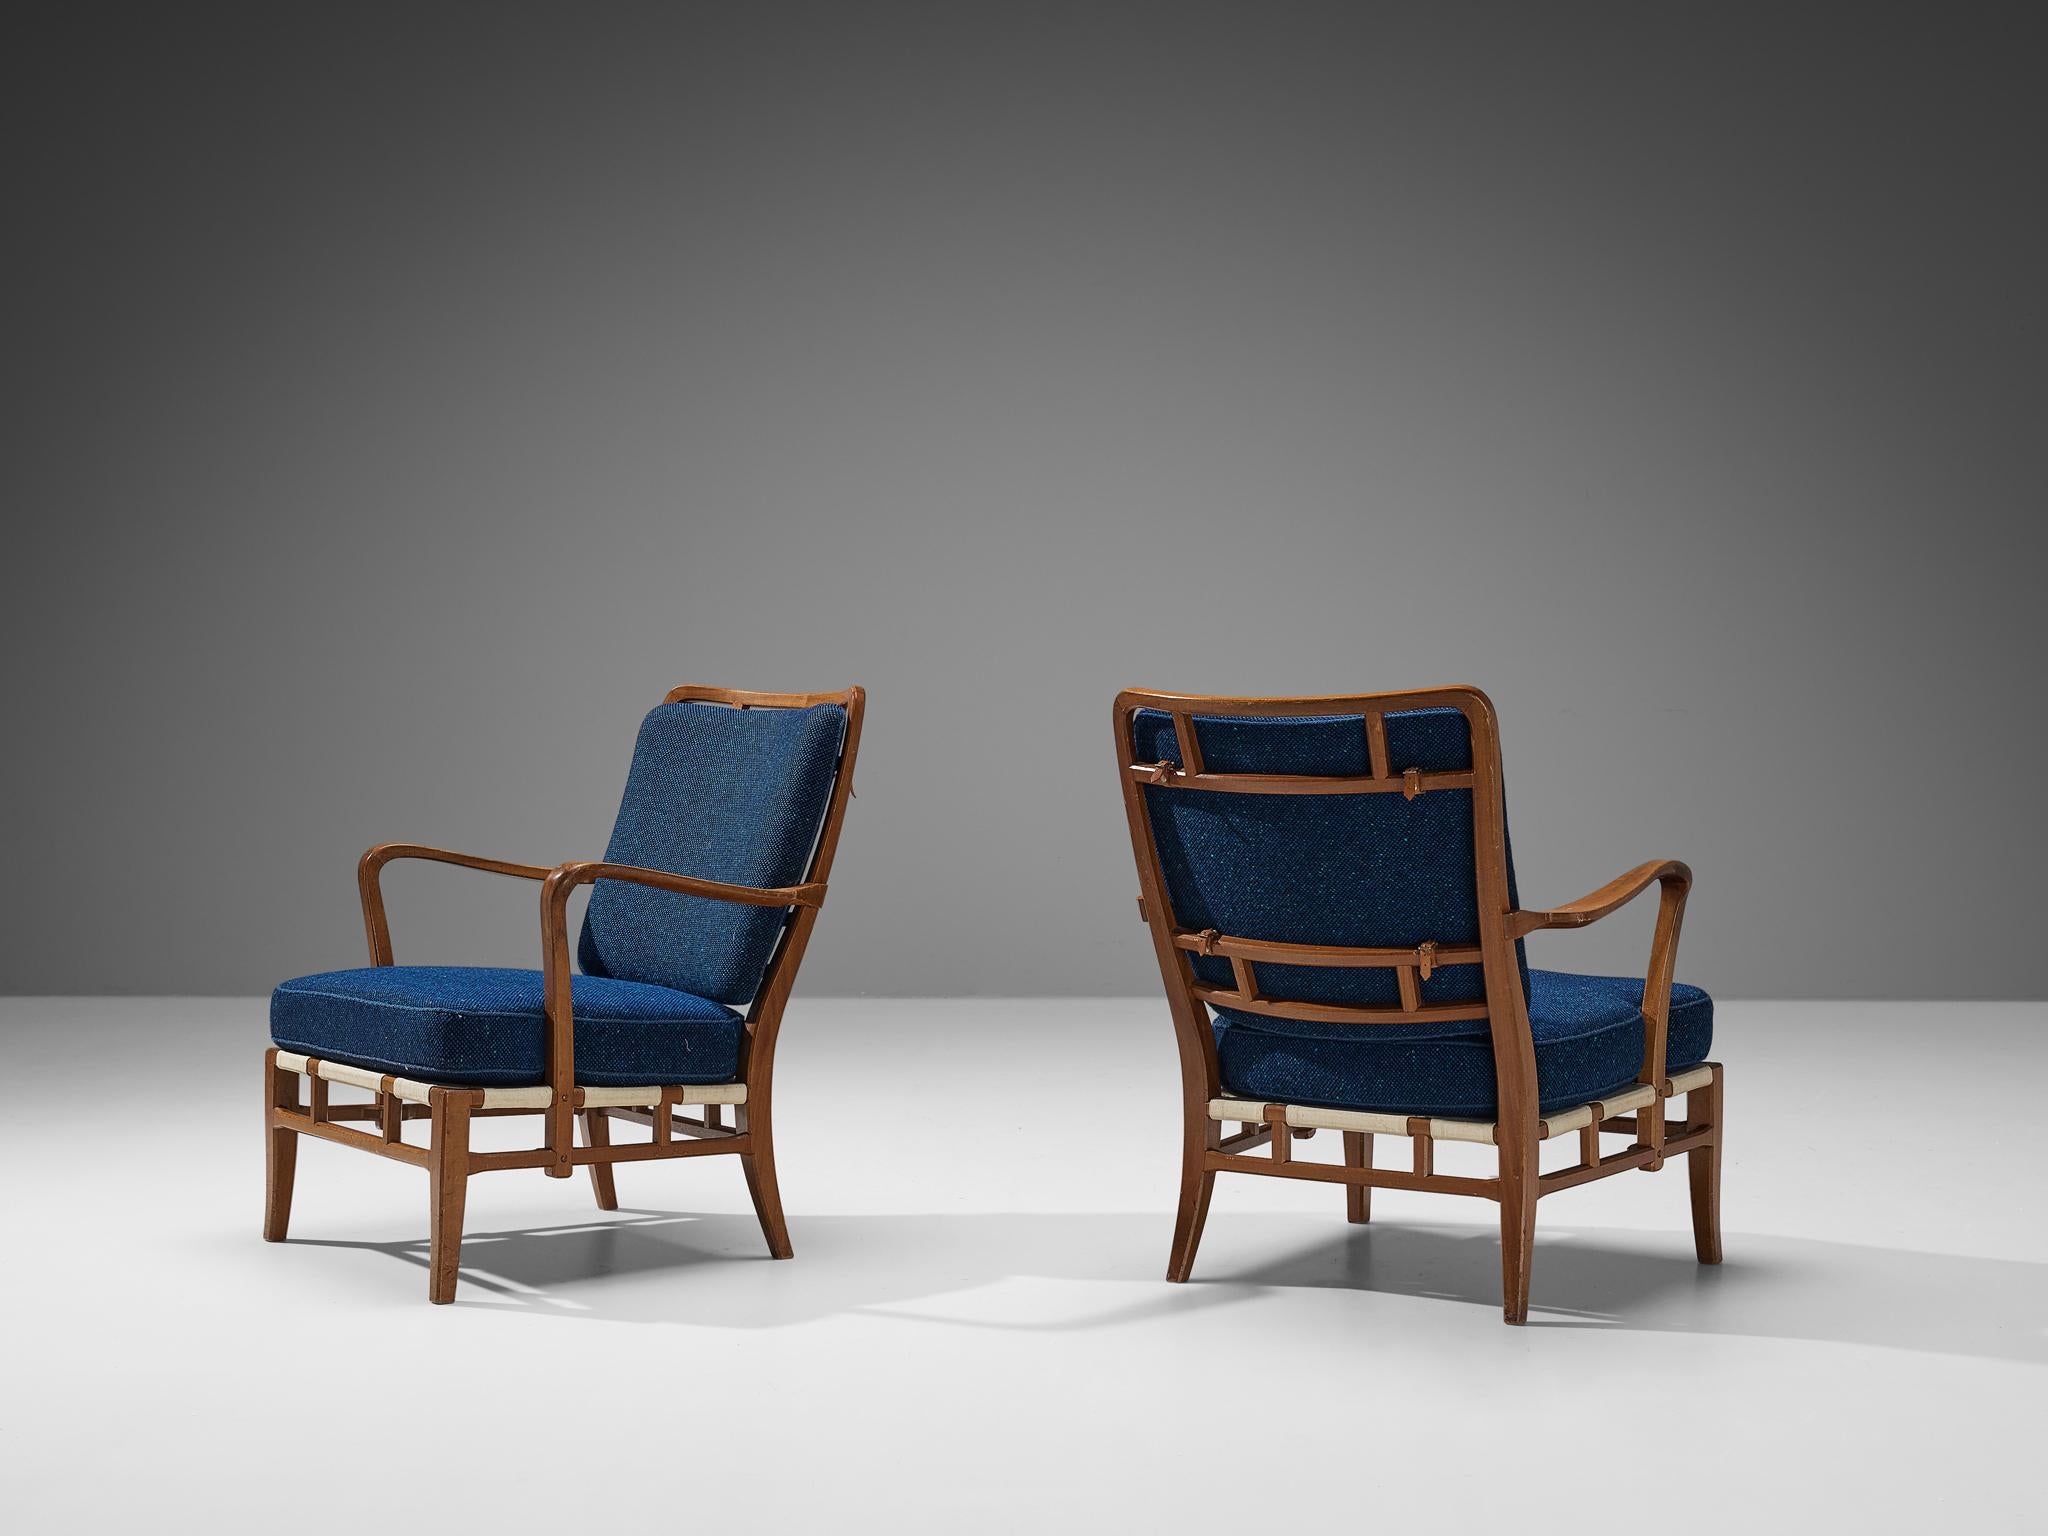 Carl-Axel Acking for Nordiska Kompaniet Hantverk, lounge chairs, mahogany, fabric, Sweden, 1940s

Beautiful set of chairs with an important provenance. These chairs are designed and previously owned by Carl-Axel Acking. Made in a rich mahogany wood